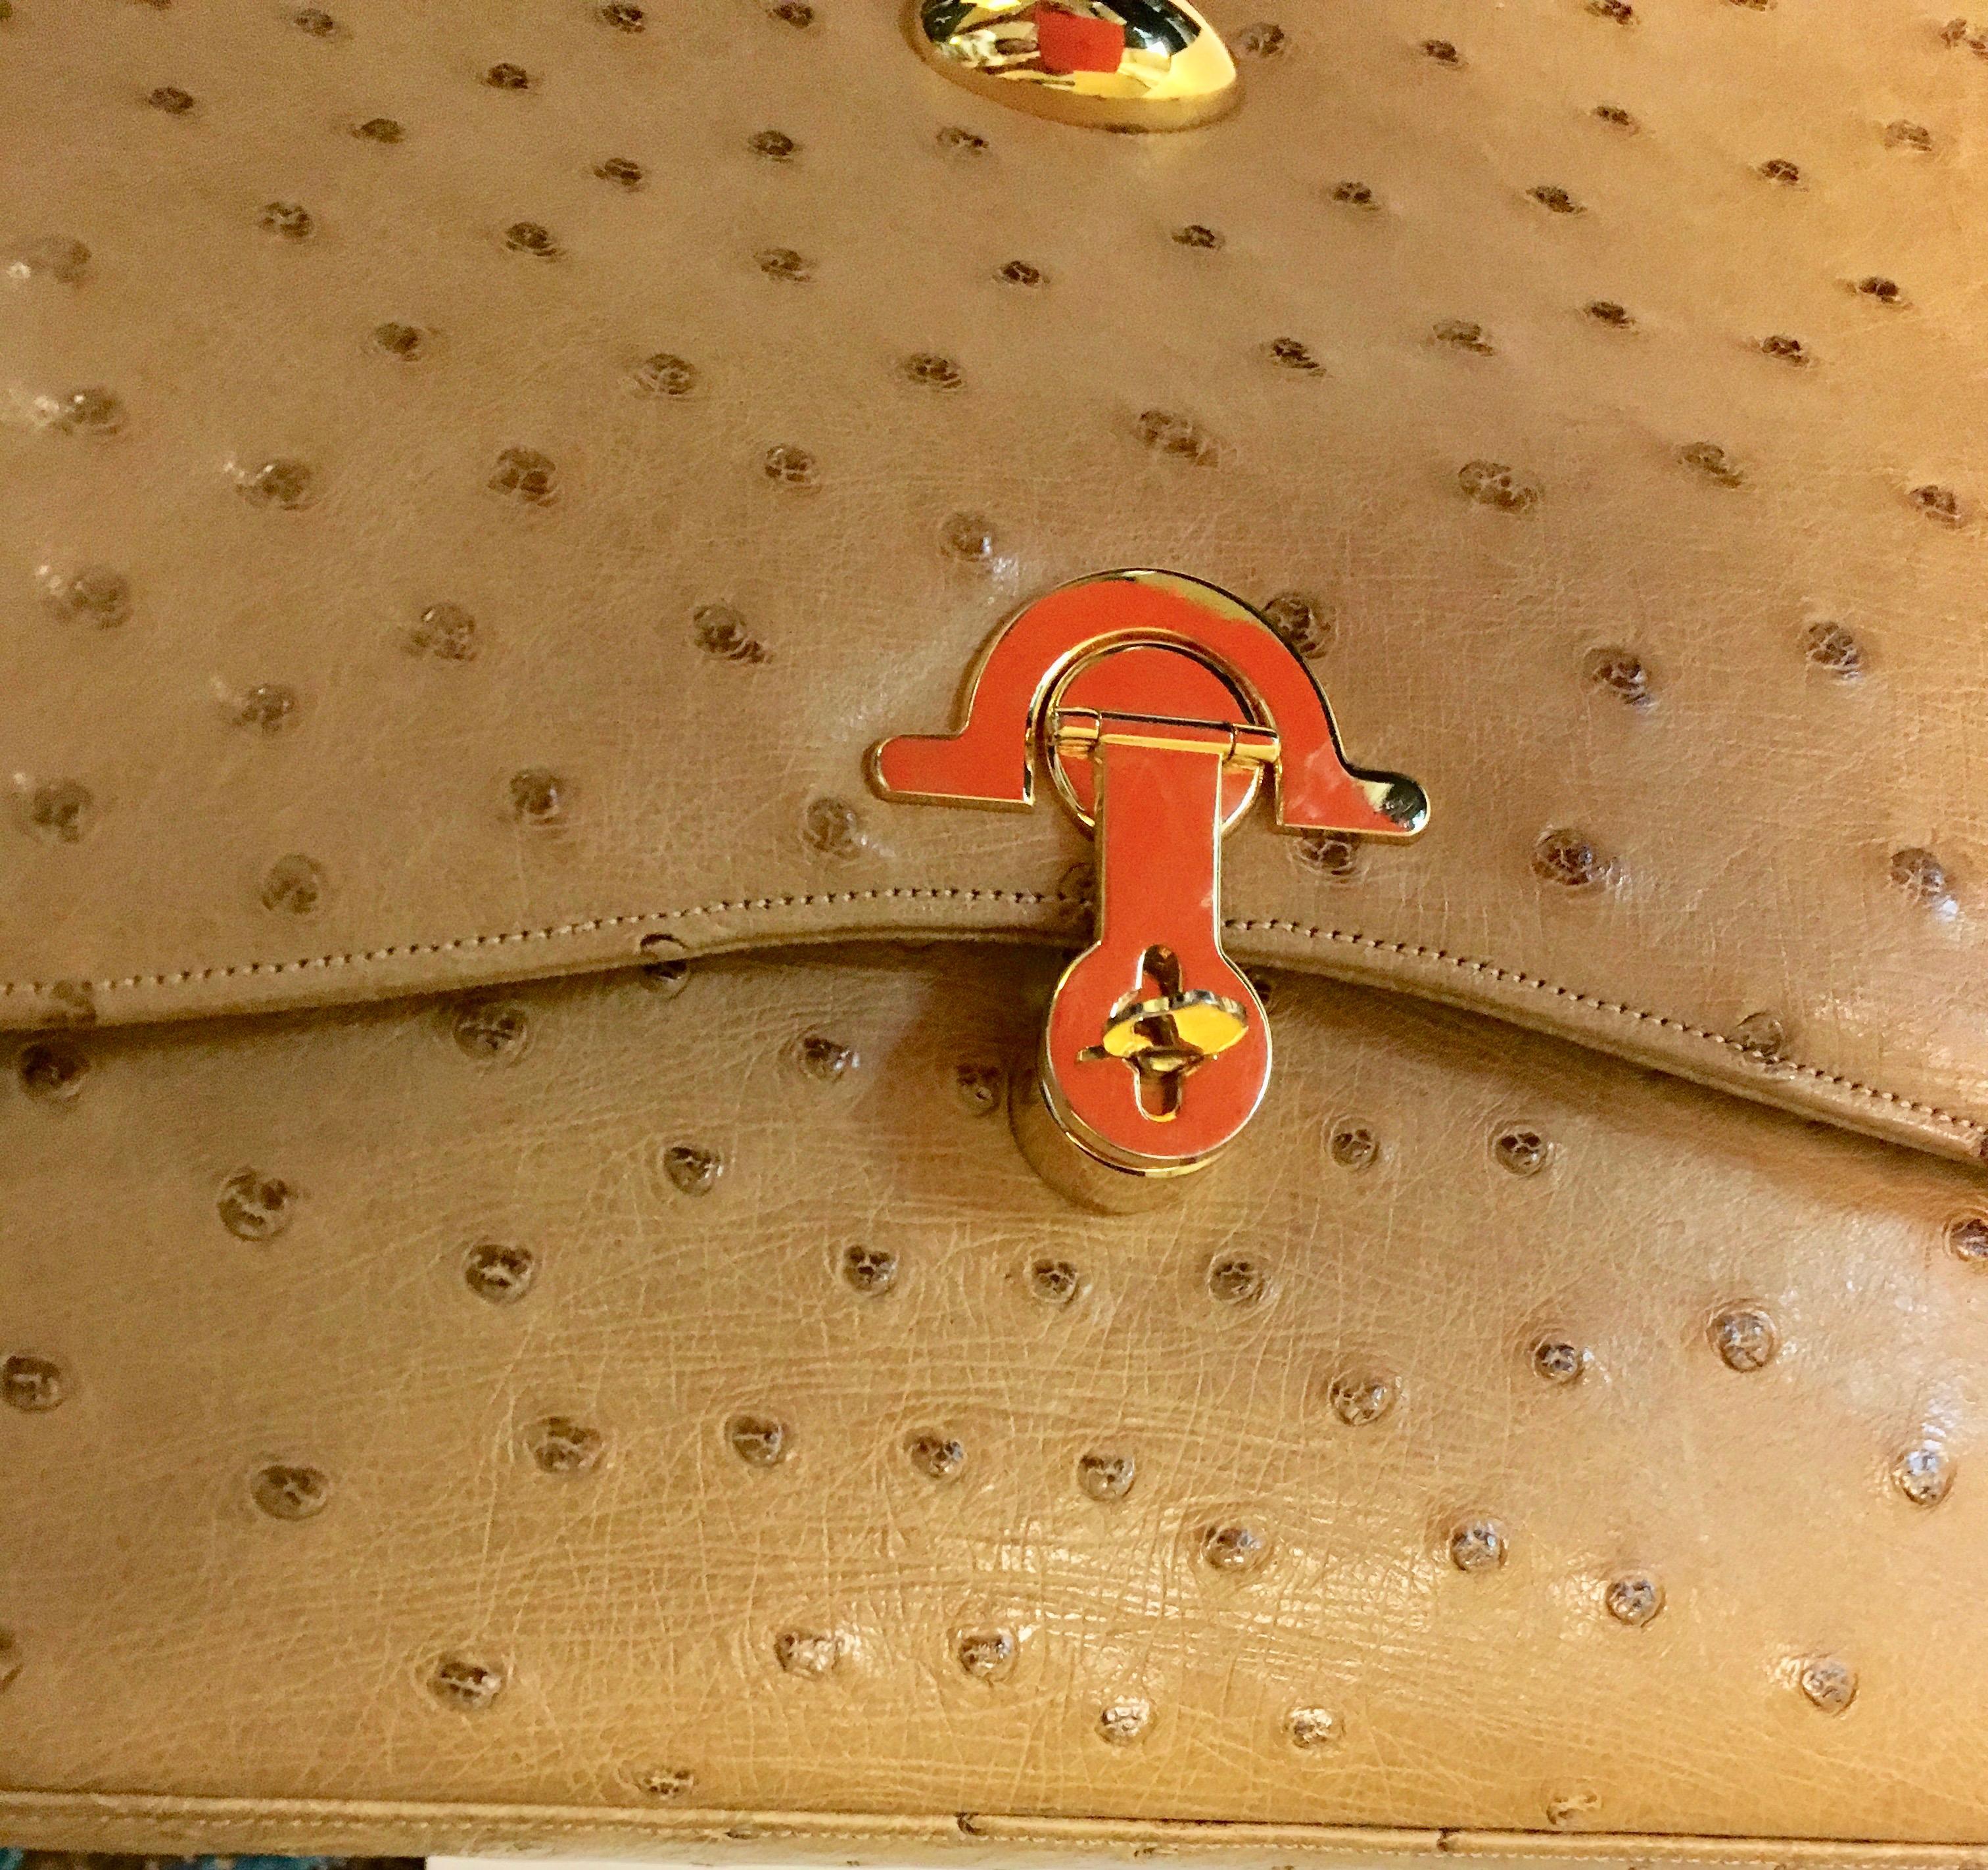 Judith Leiber Ostrich Purse  In Excellent Condition For Sale In Boca Raton, FL